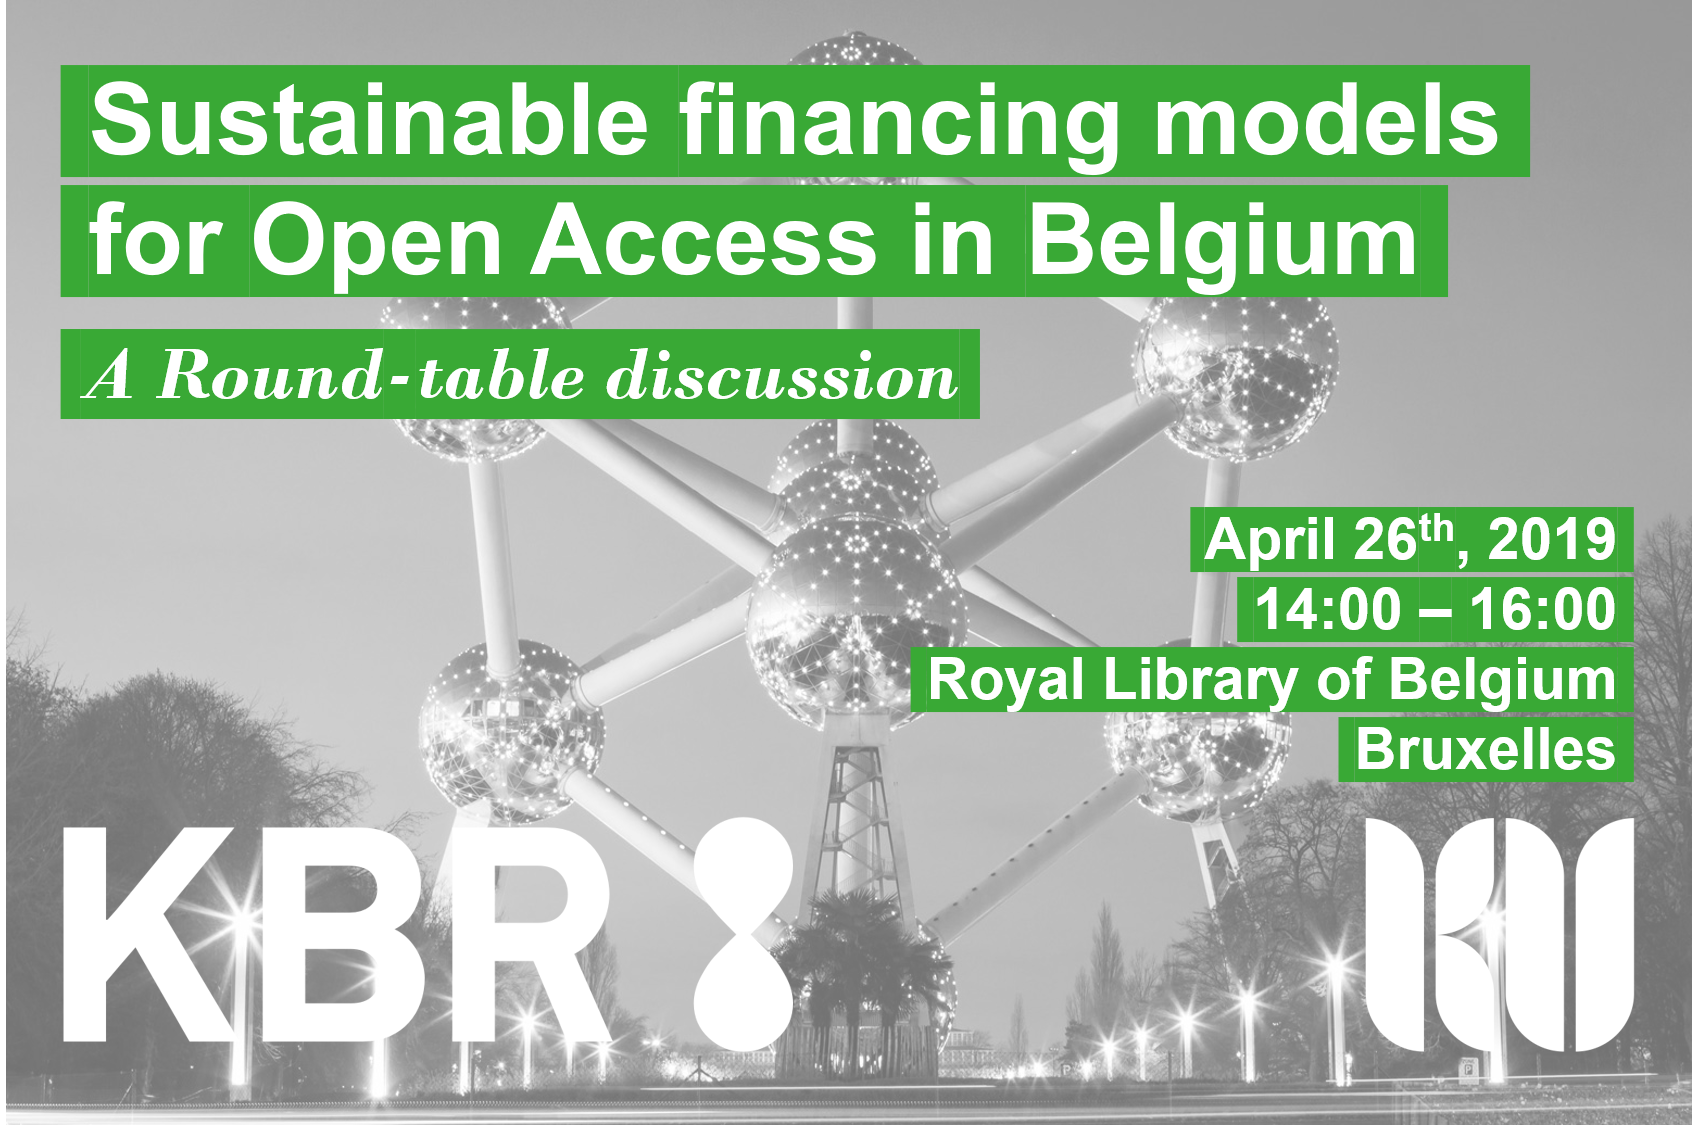 KU and BKR to host round-table discussion on Open Access in Belgium